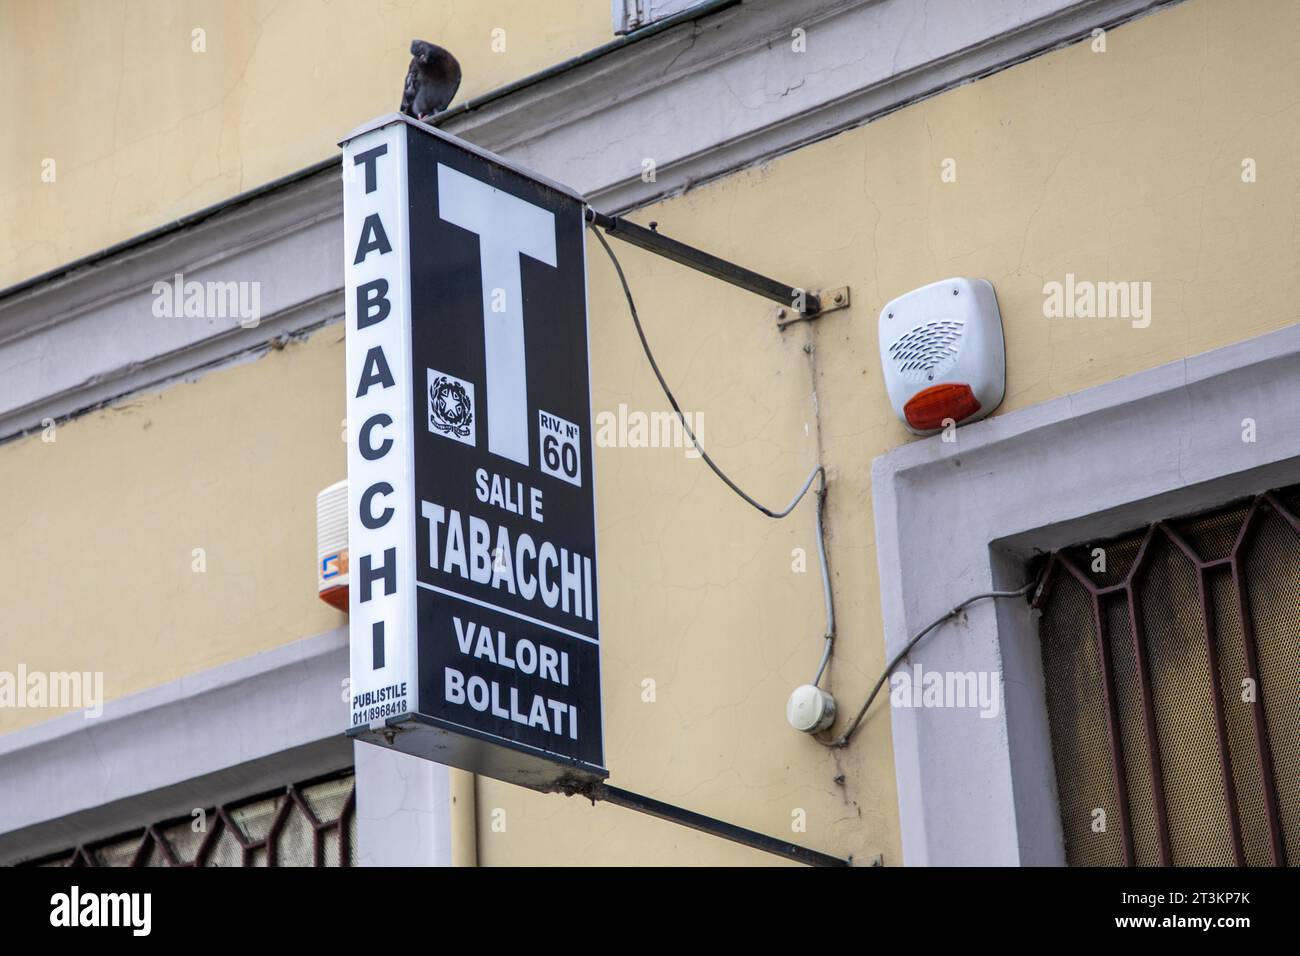 Milan , Italy  - 10 18 2023 : tabacchi italy logo brand and text sign shop tobacco tobacconist store facade retailer products italian Stock Photo